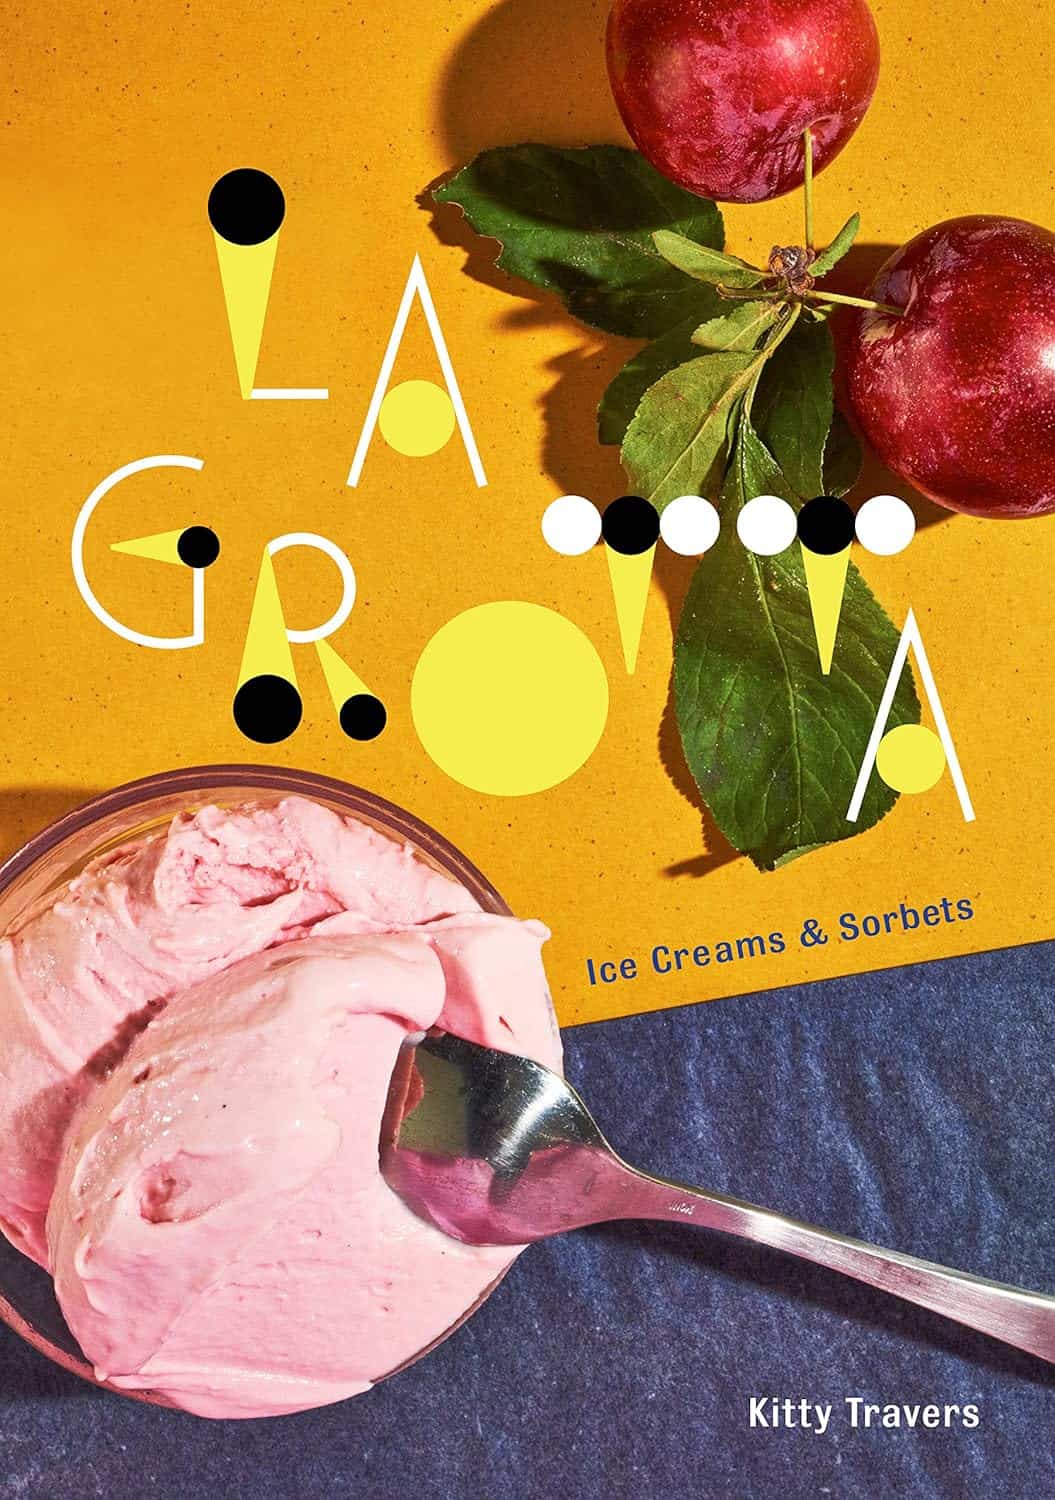 La Grotta: Ice Creams and Sorbets by Kitty Travers